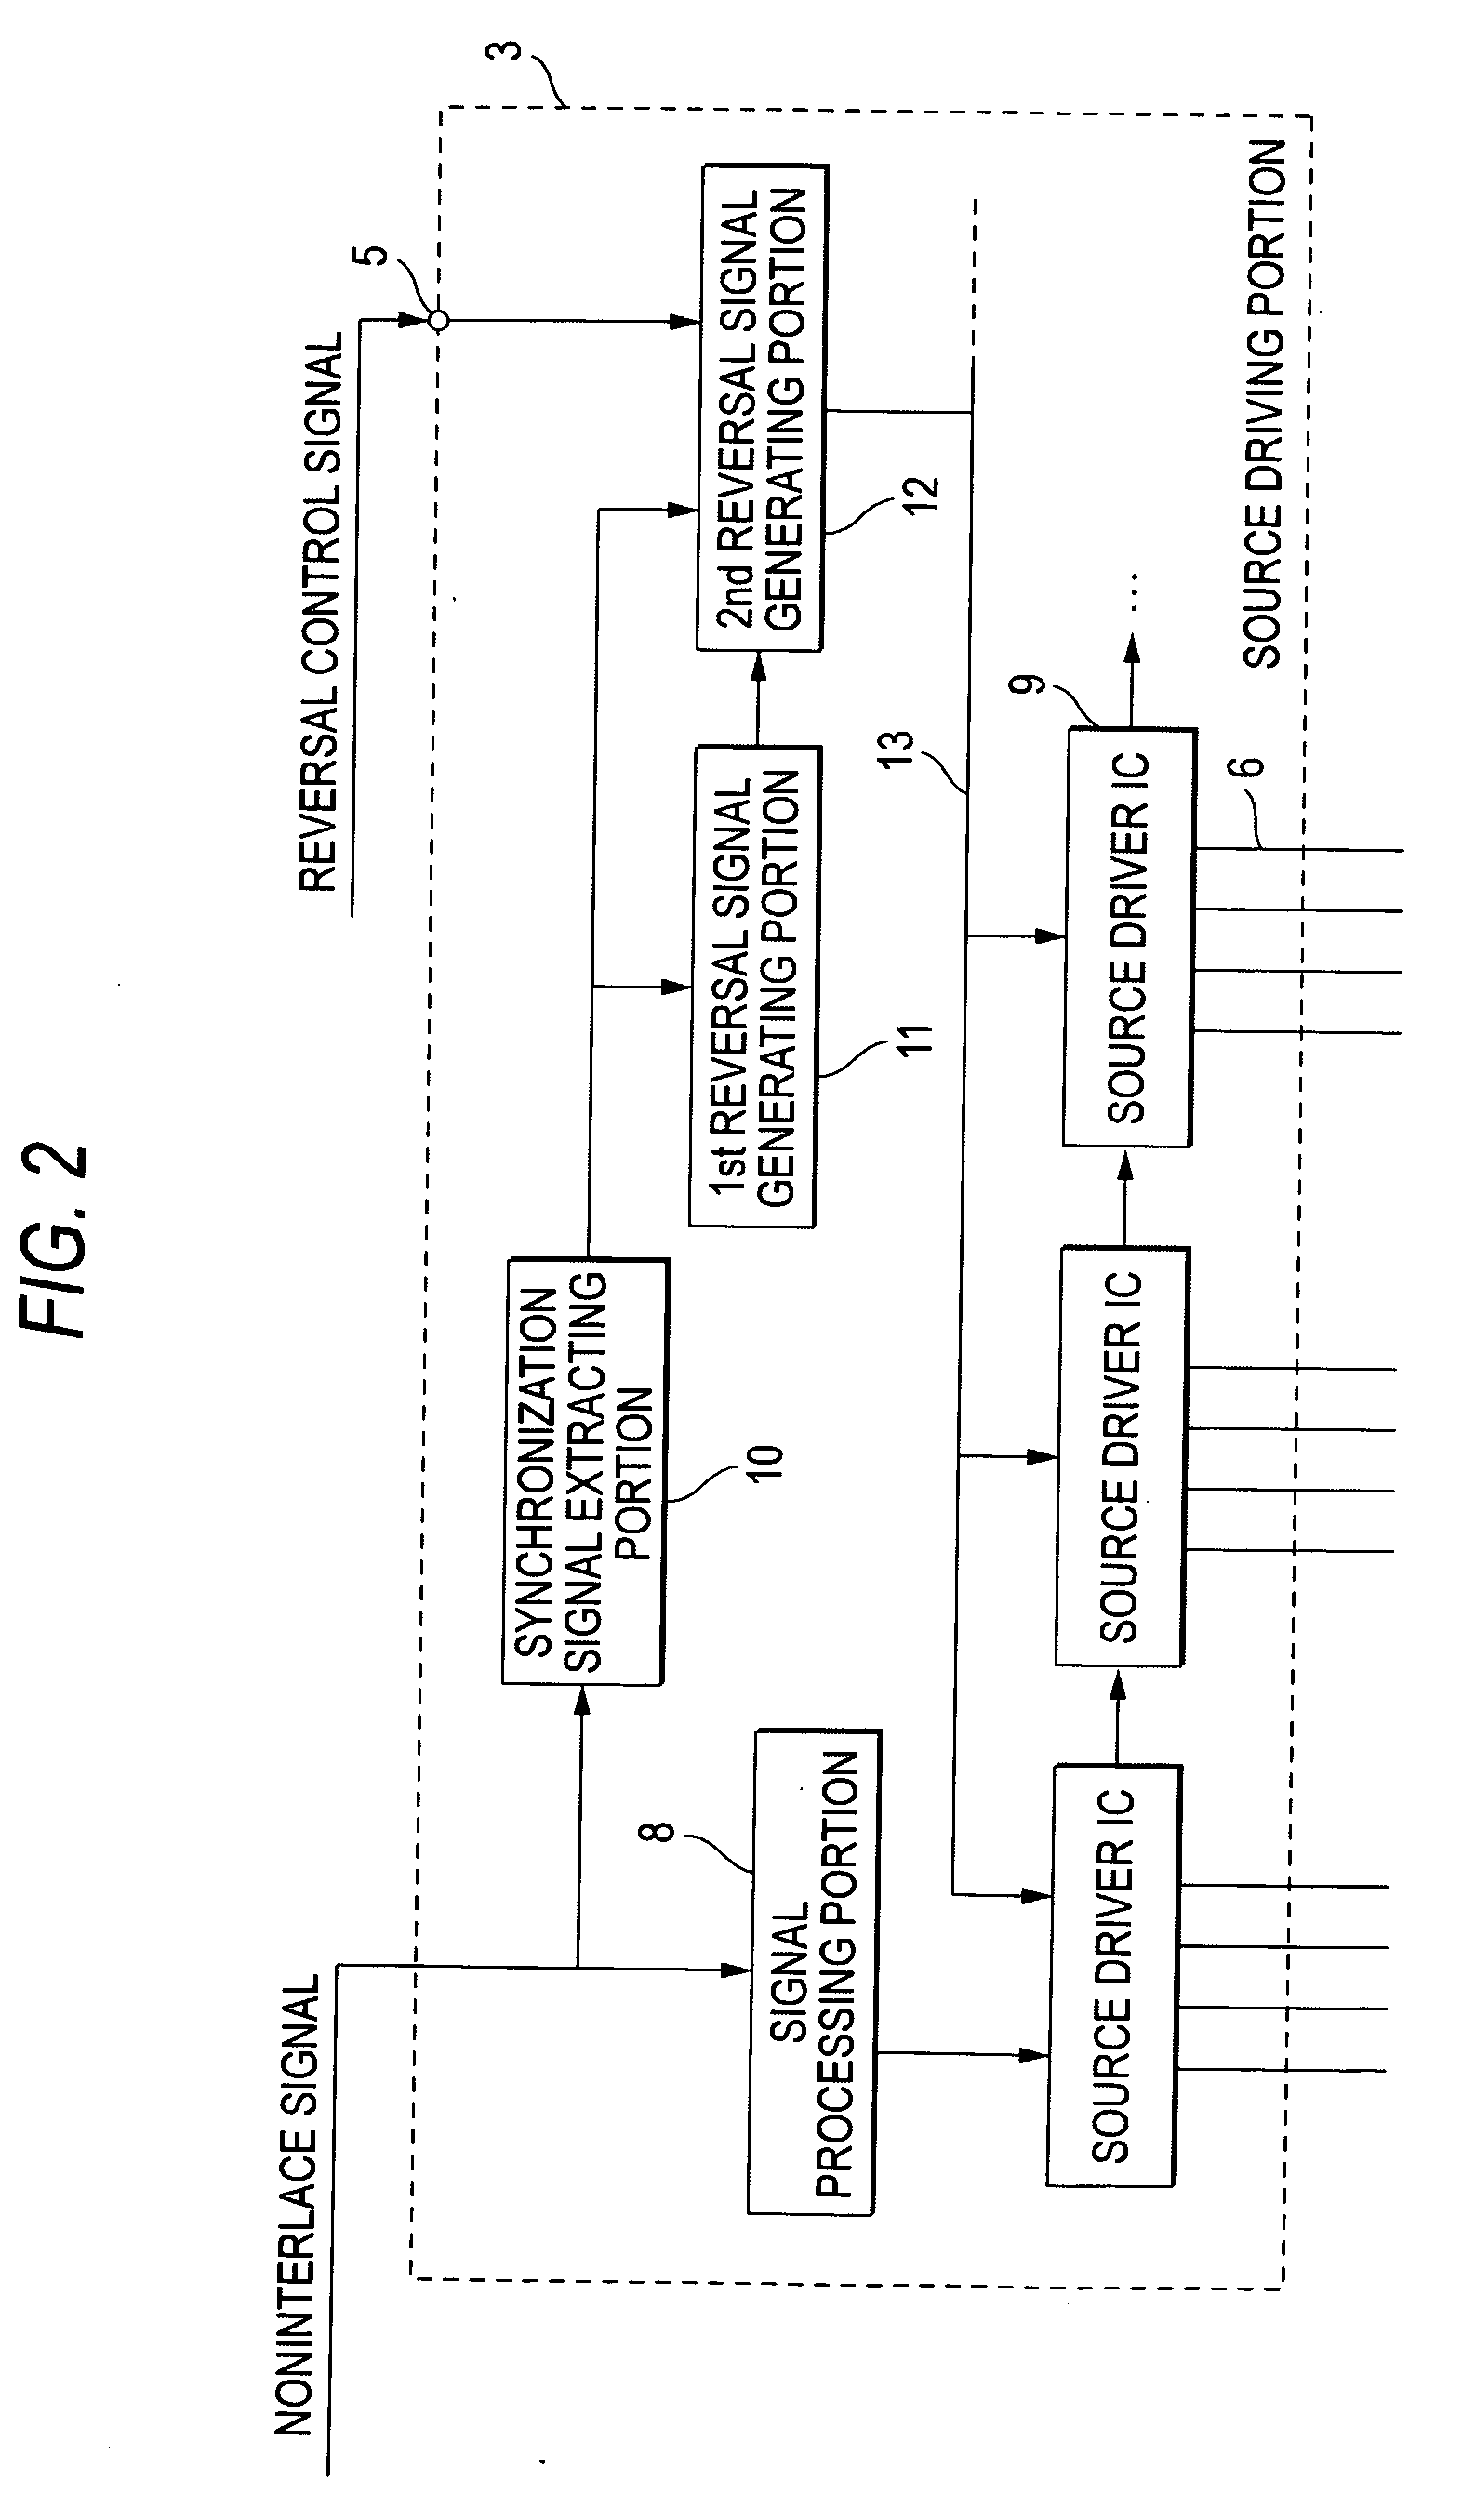 Liquid crystal display apparatus and alternating current driving method therefore